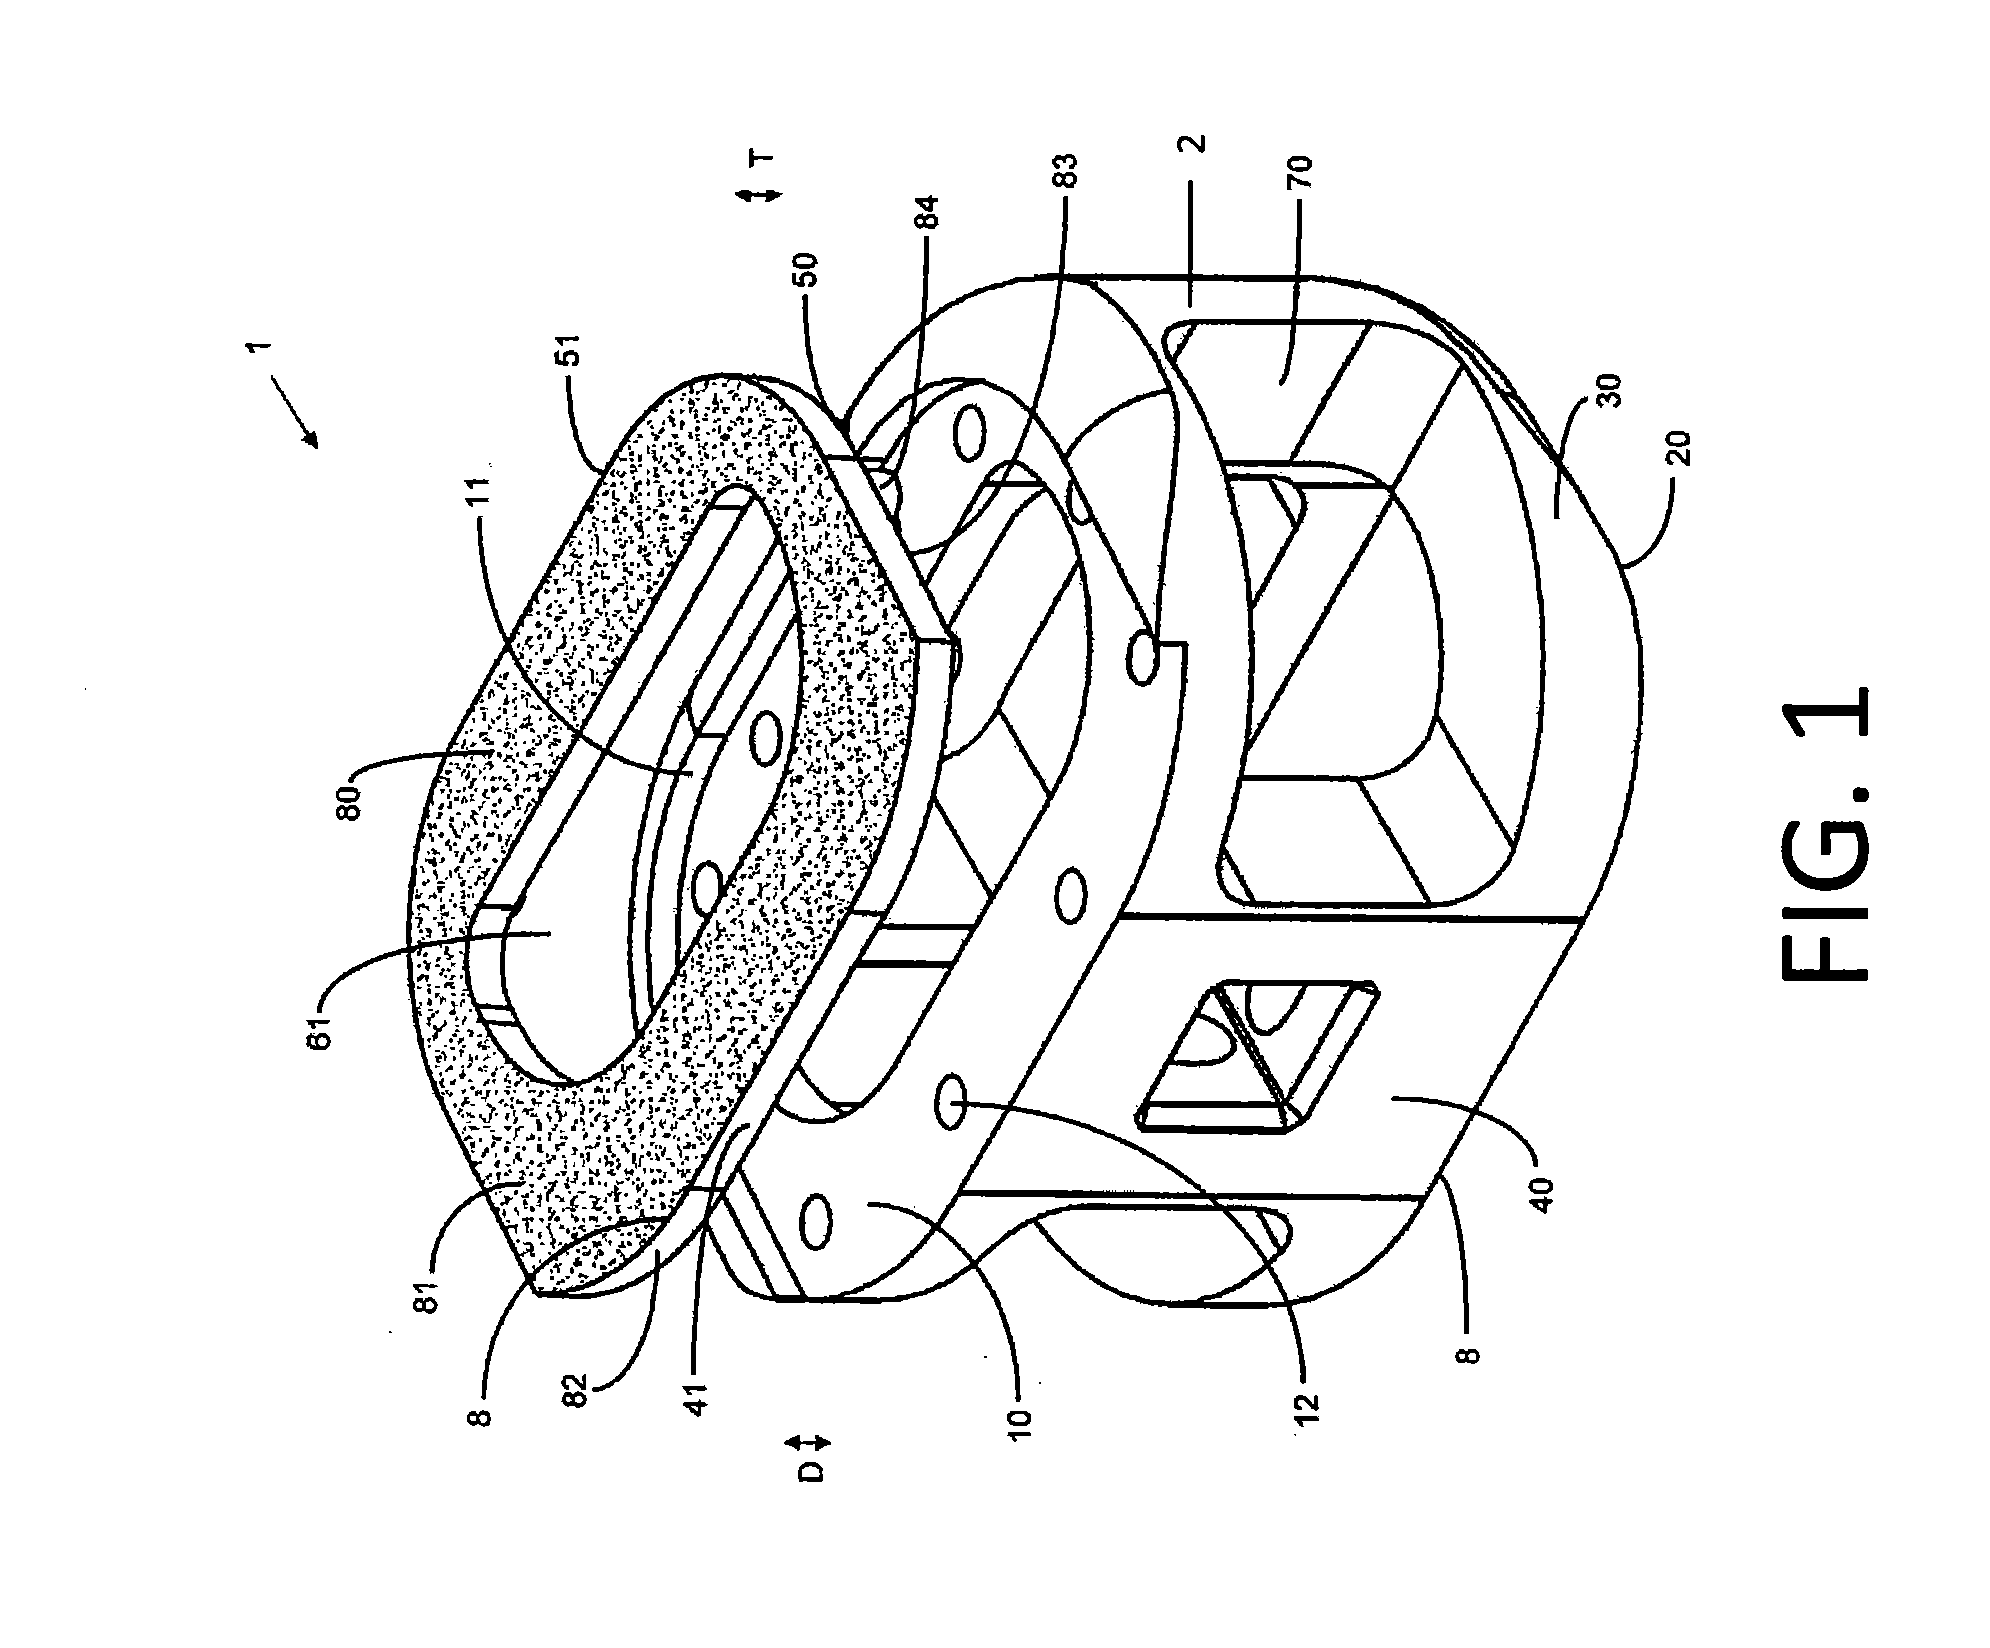 Composite implants having integration surfaces composed of a regular repeating pattern